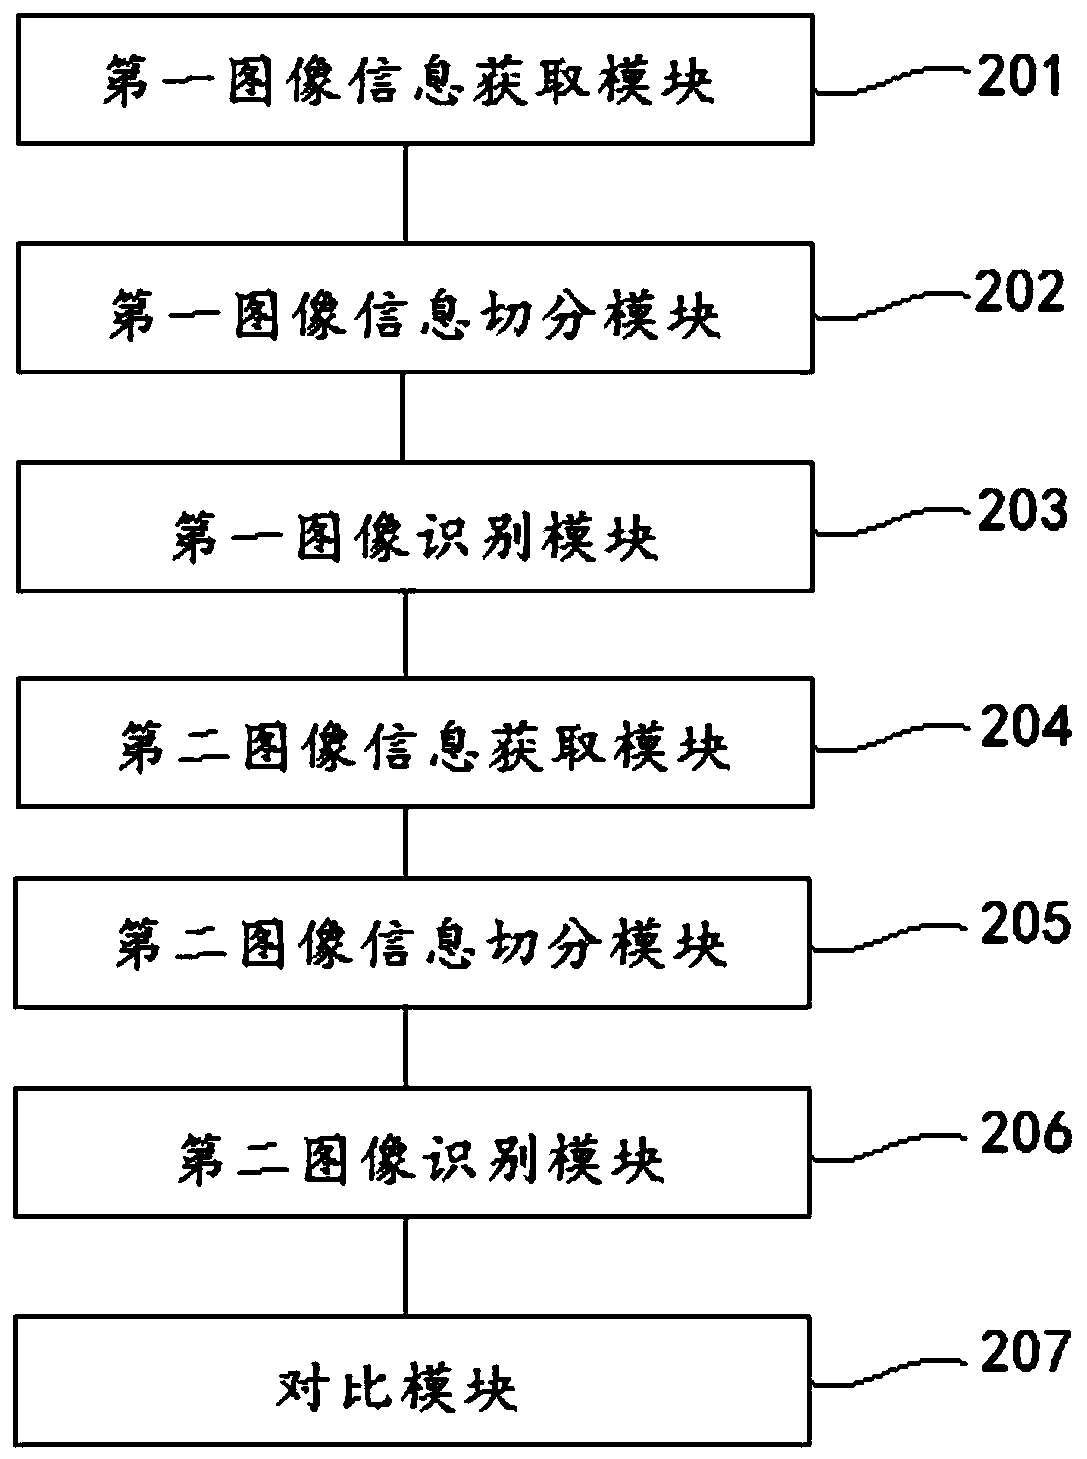 Test paper correction method and system based on artificial intelligence